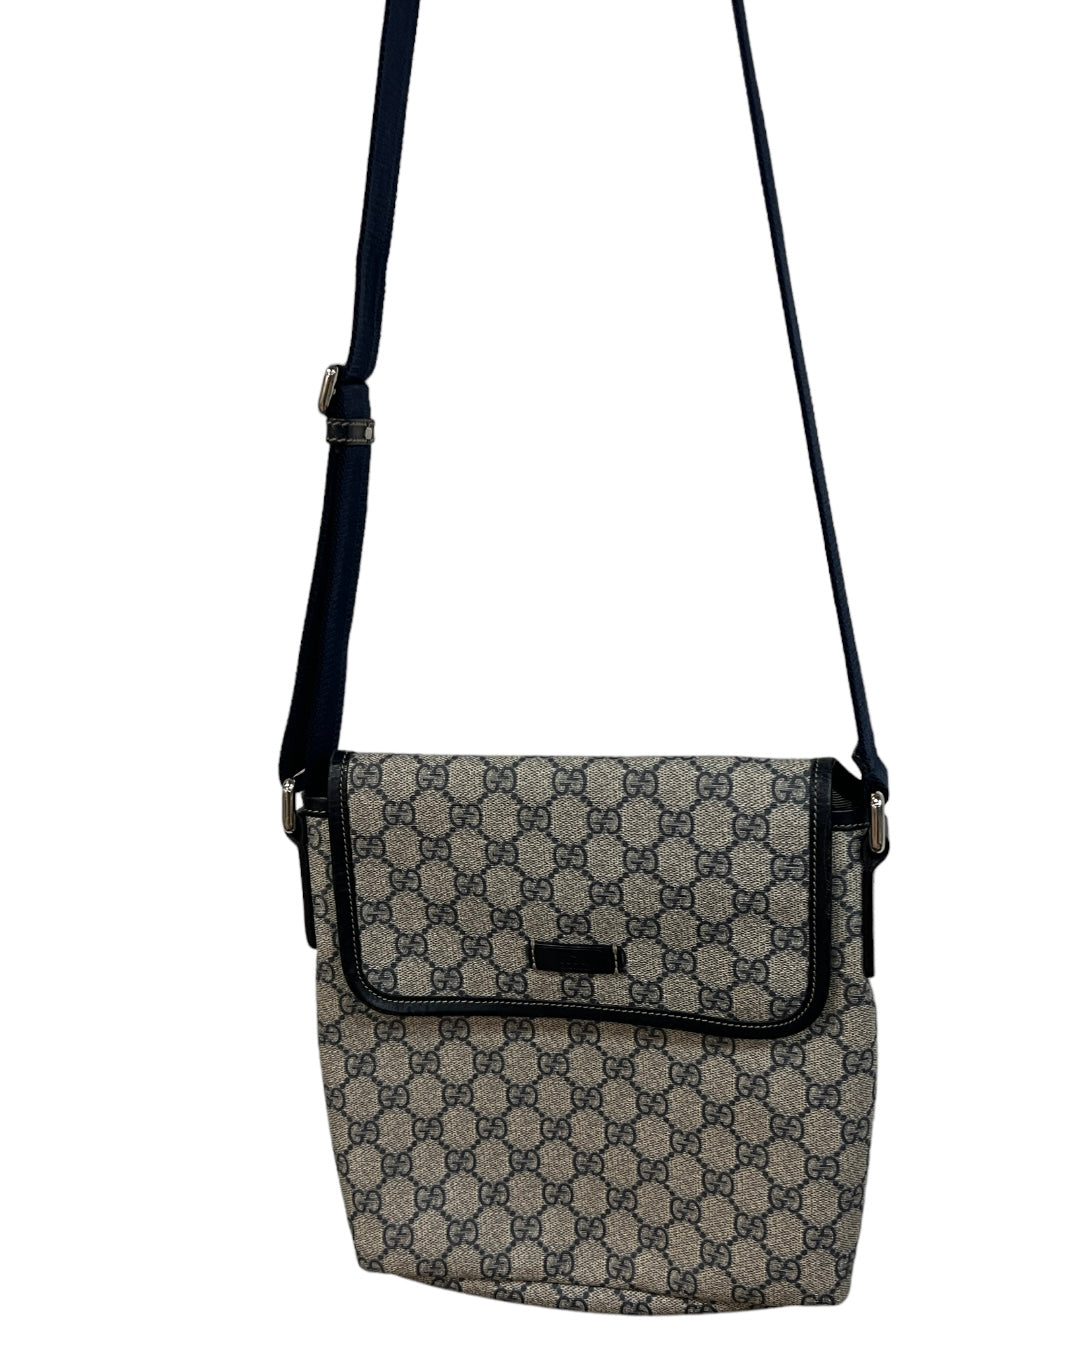 Gucci, Bags, Authentic Gucci Cross Body Bag